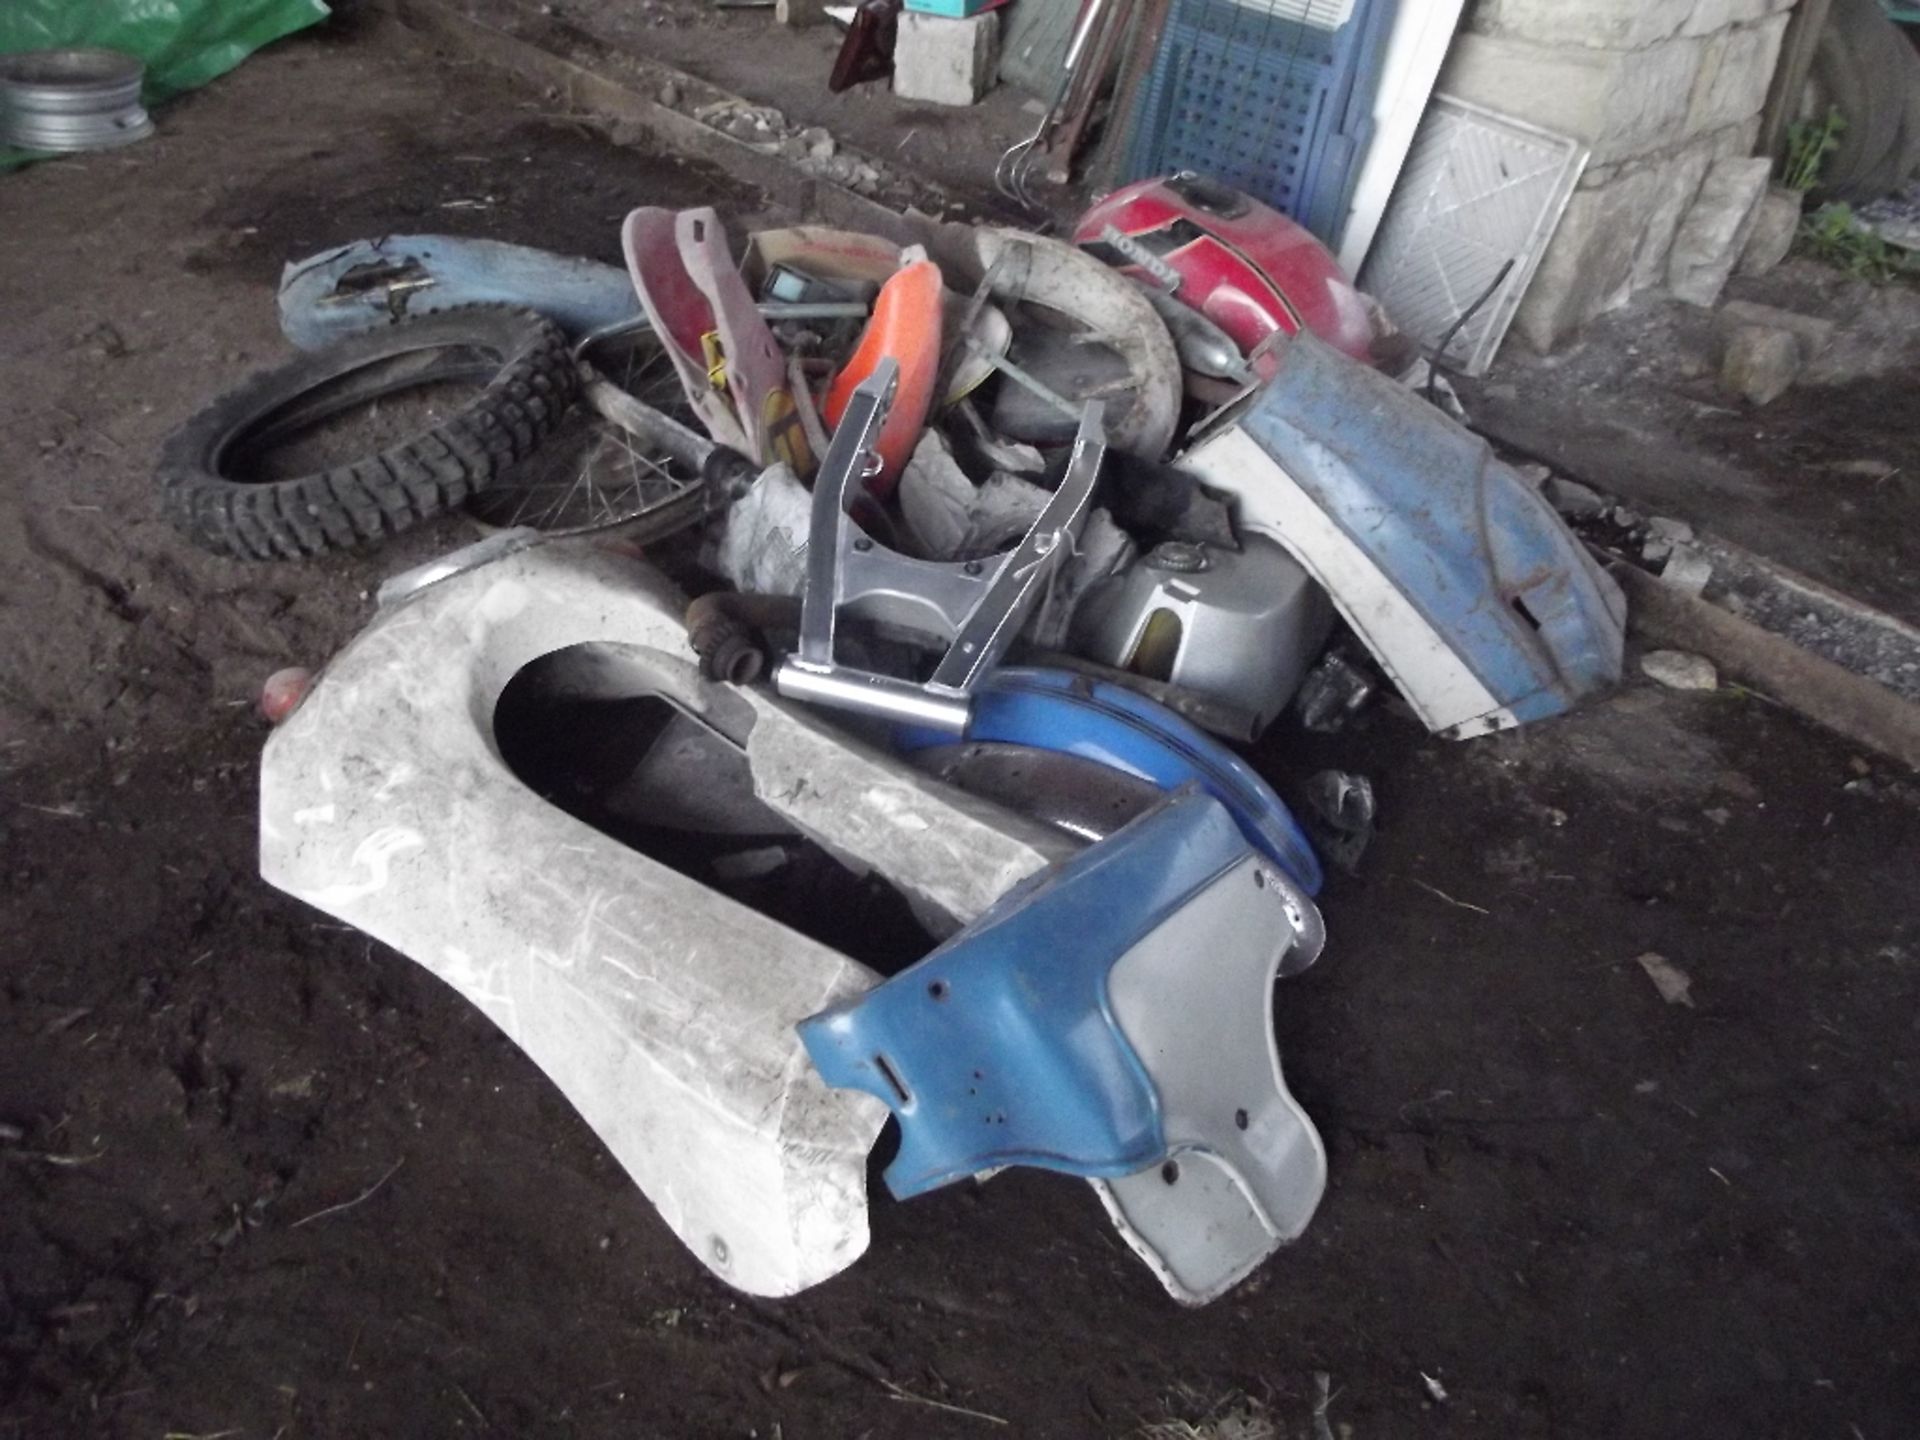 Assorted motorcycle spares, including No